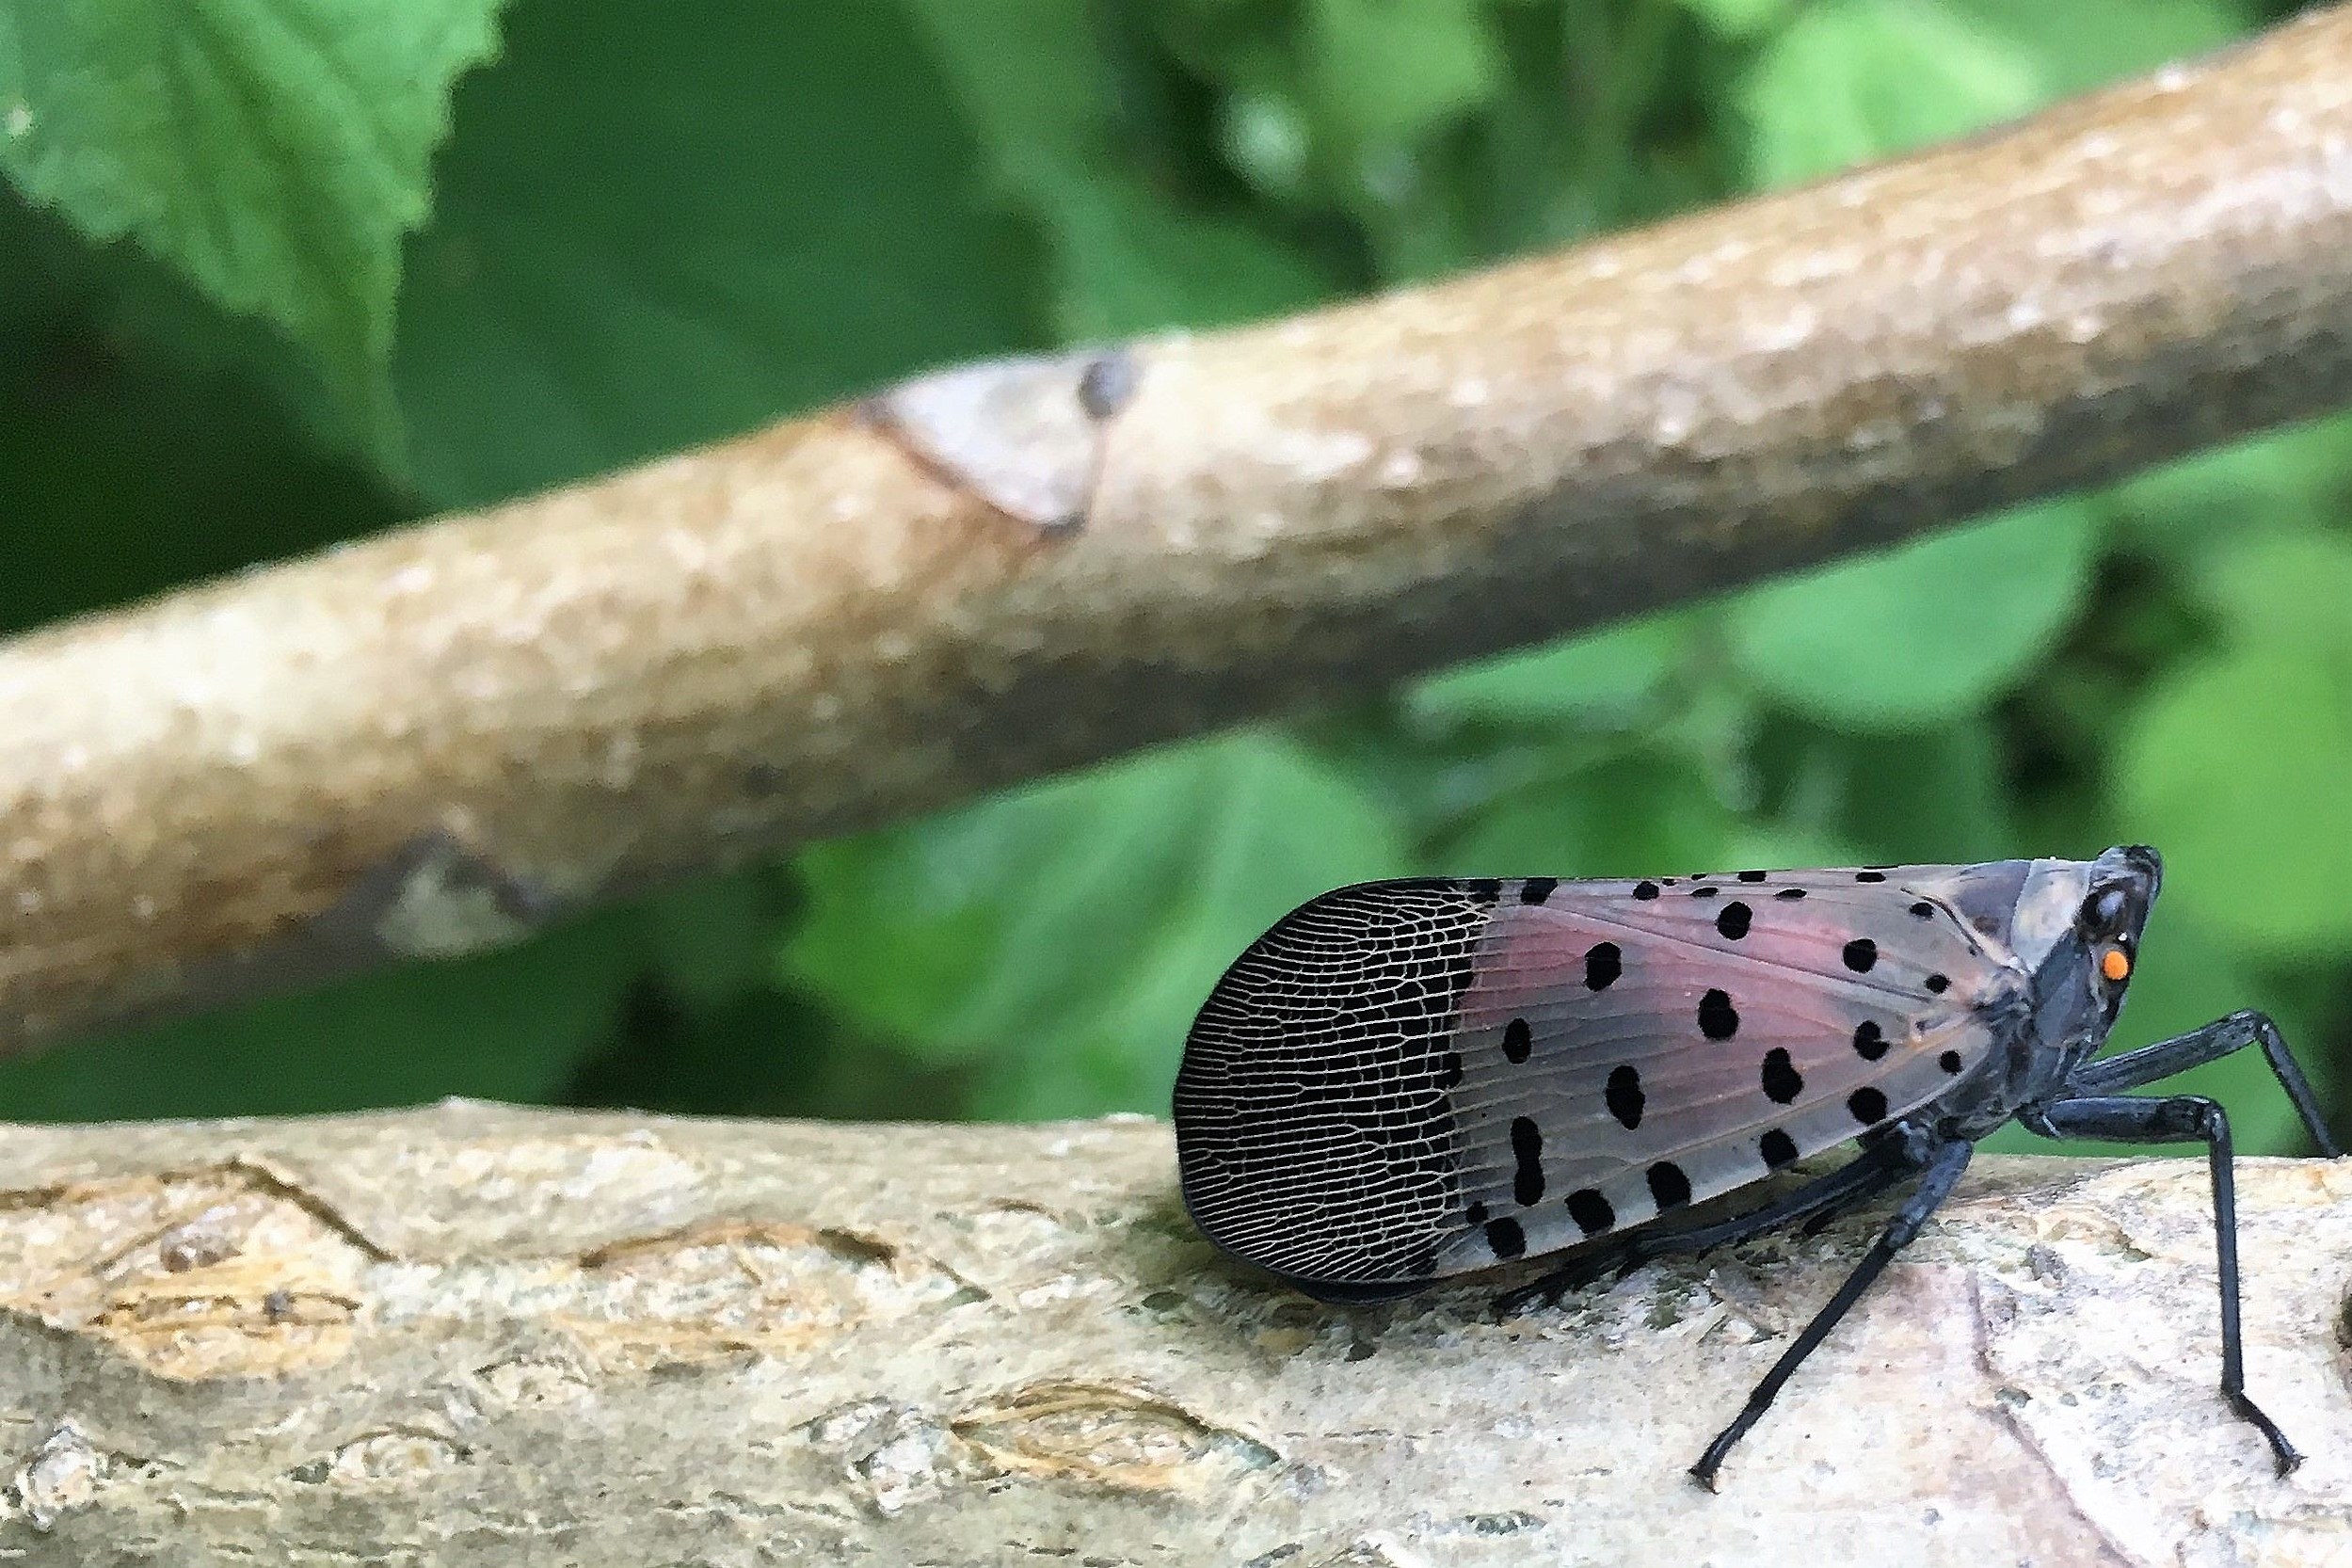 Bolt Porn Bolt Penn - Can parasitic wasps handle NJ's spotted lanternfly invasion?